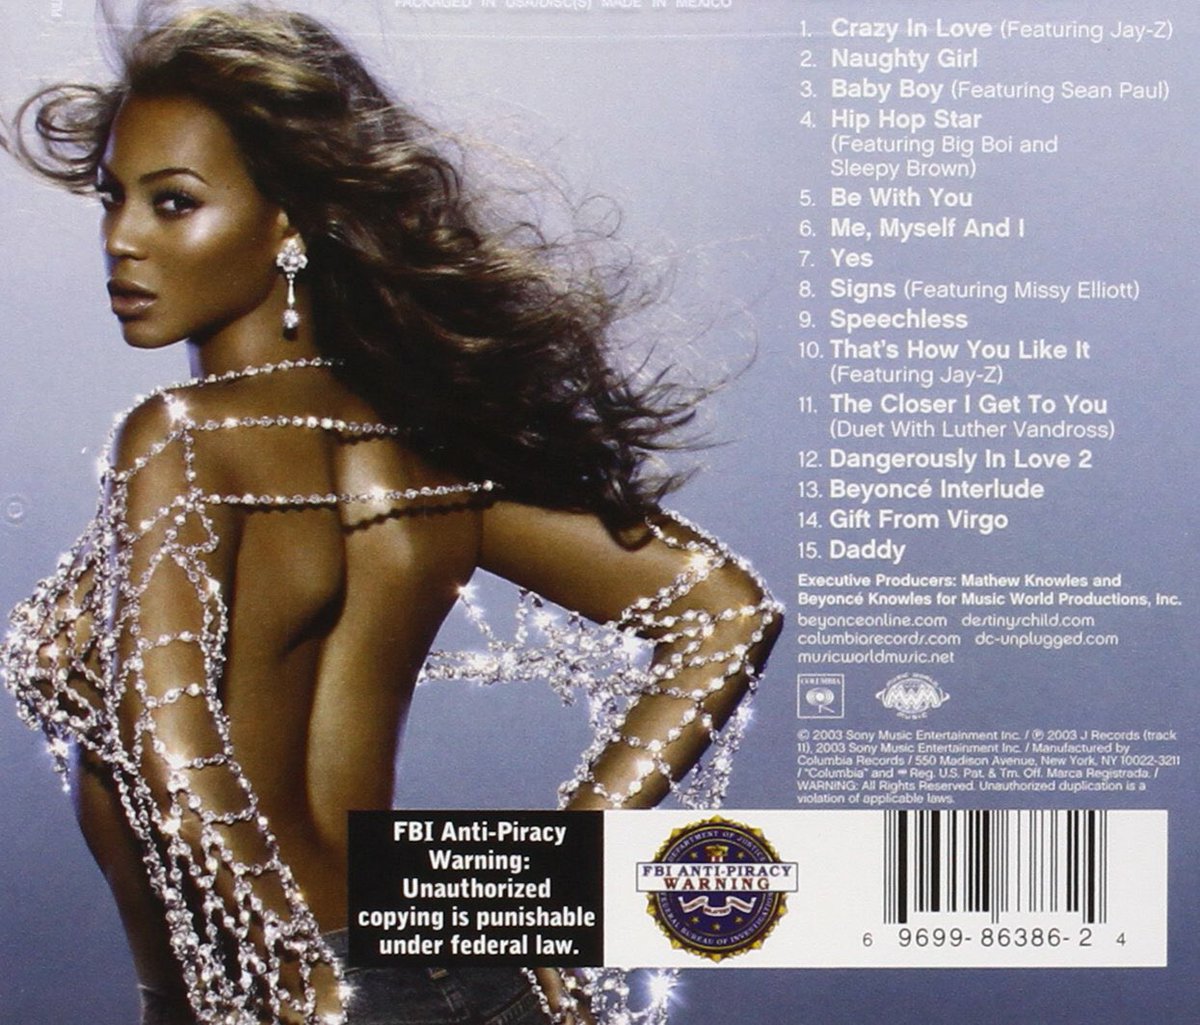 Preparing for tomorrow so you know I gotta know... What’s your favorite song on Beyoncé’s Dangerously in love album?